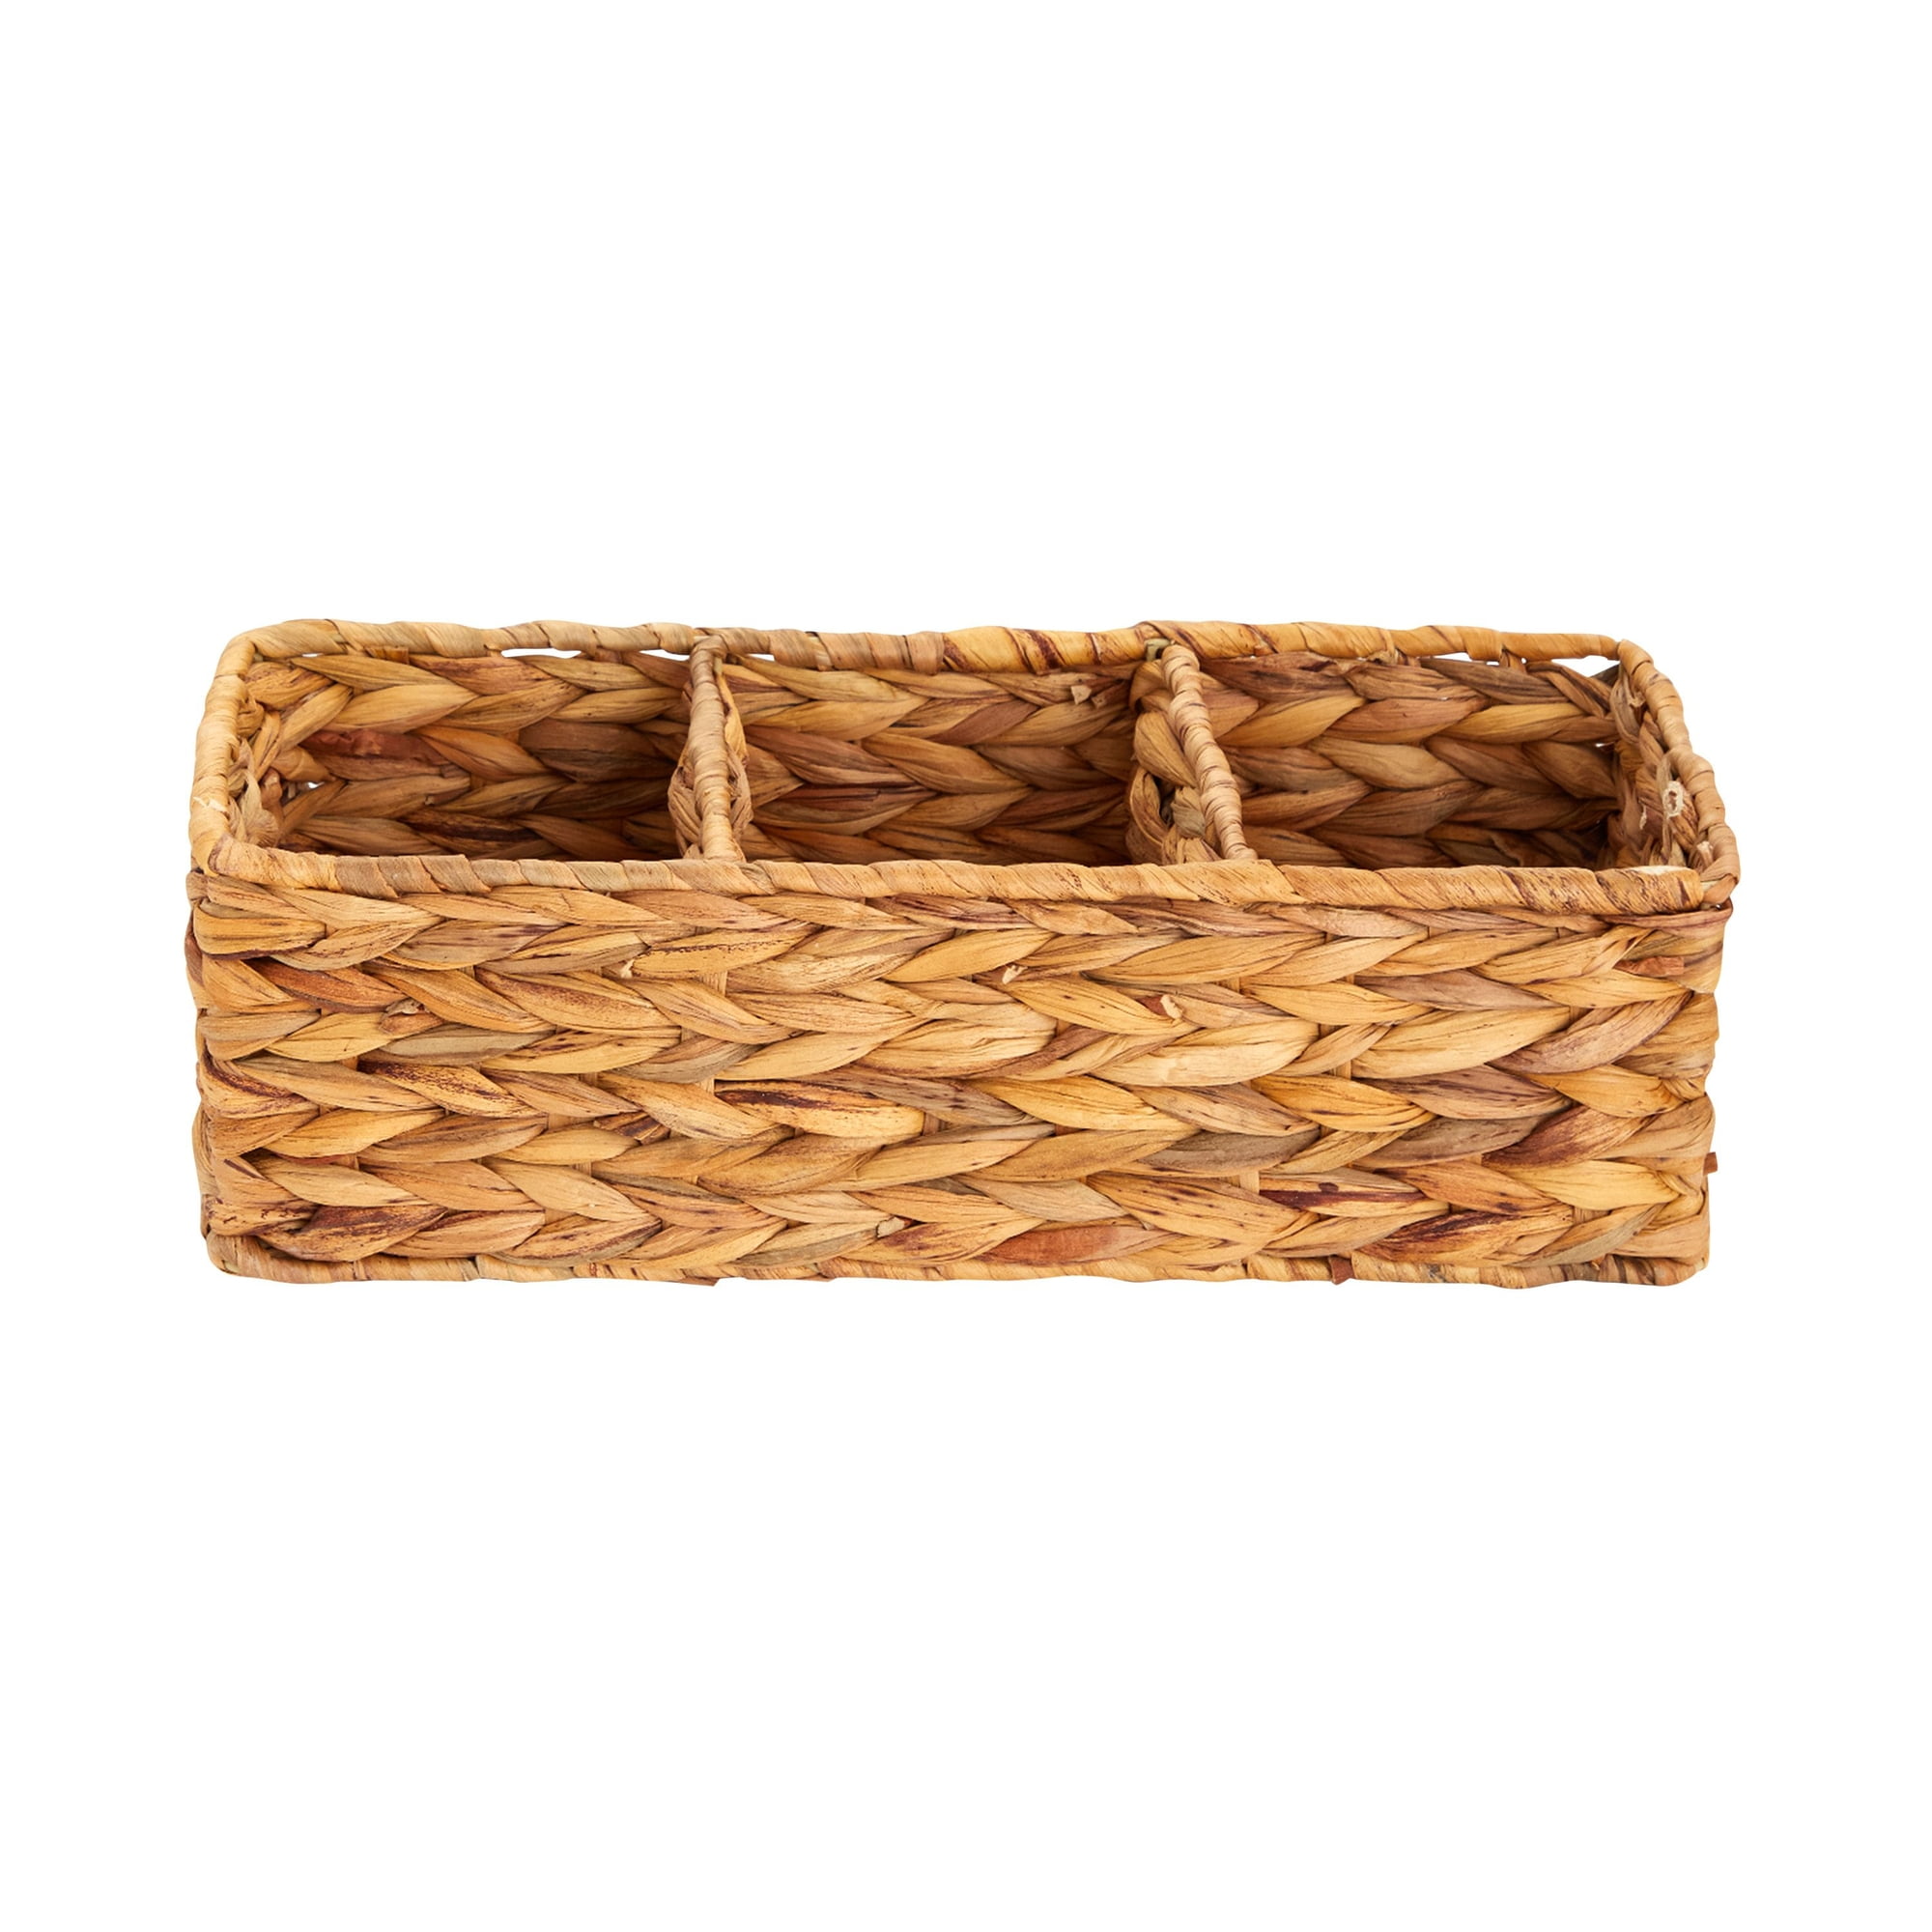 Farmlyn Creek 3-Pack 9 inch Square Wicker Storage Baskets with Liners -  Small Woven Bins for Organizing Kitchen and Closet Shelves